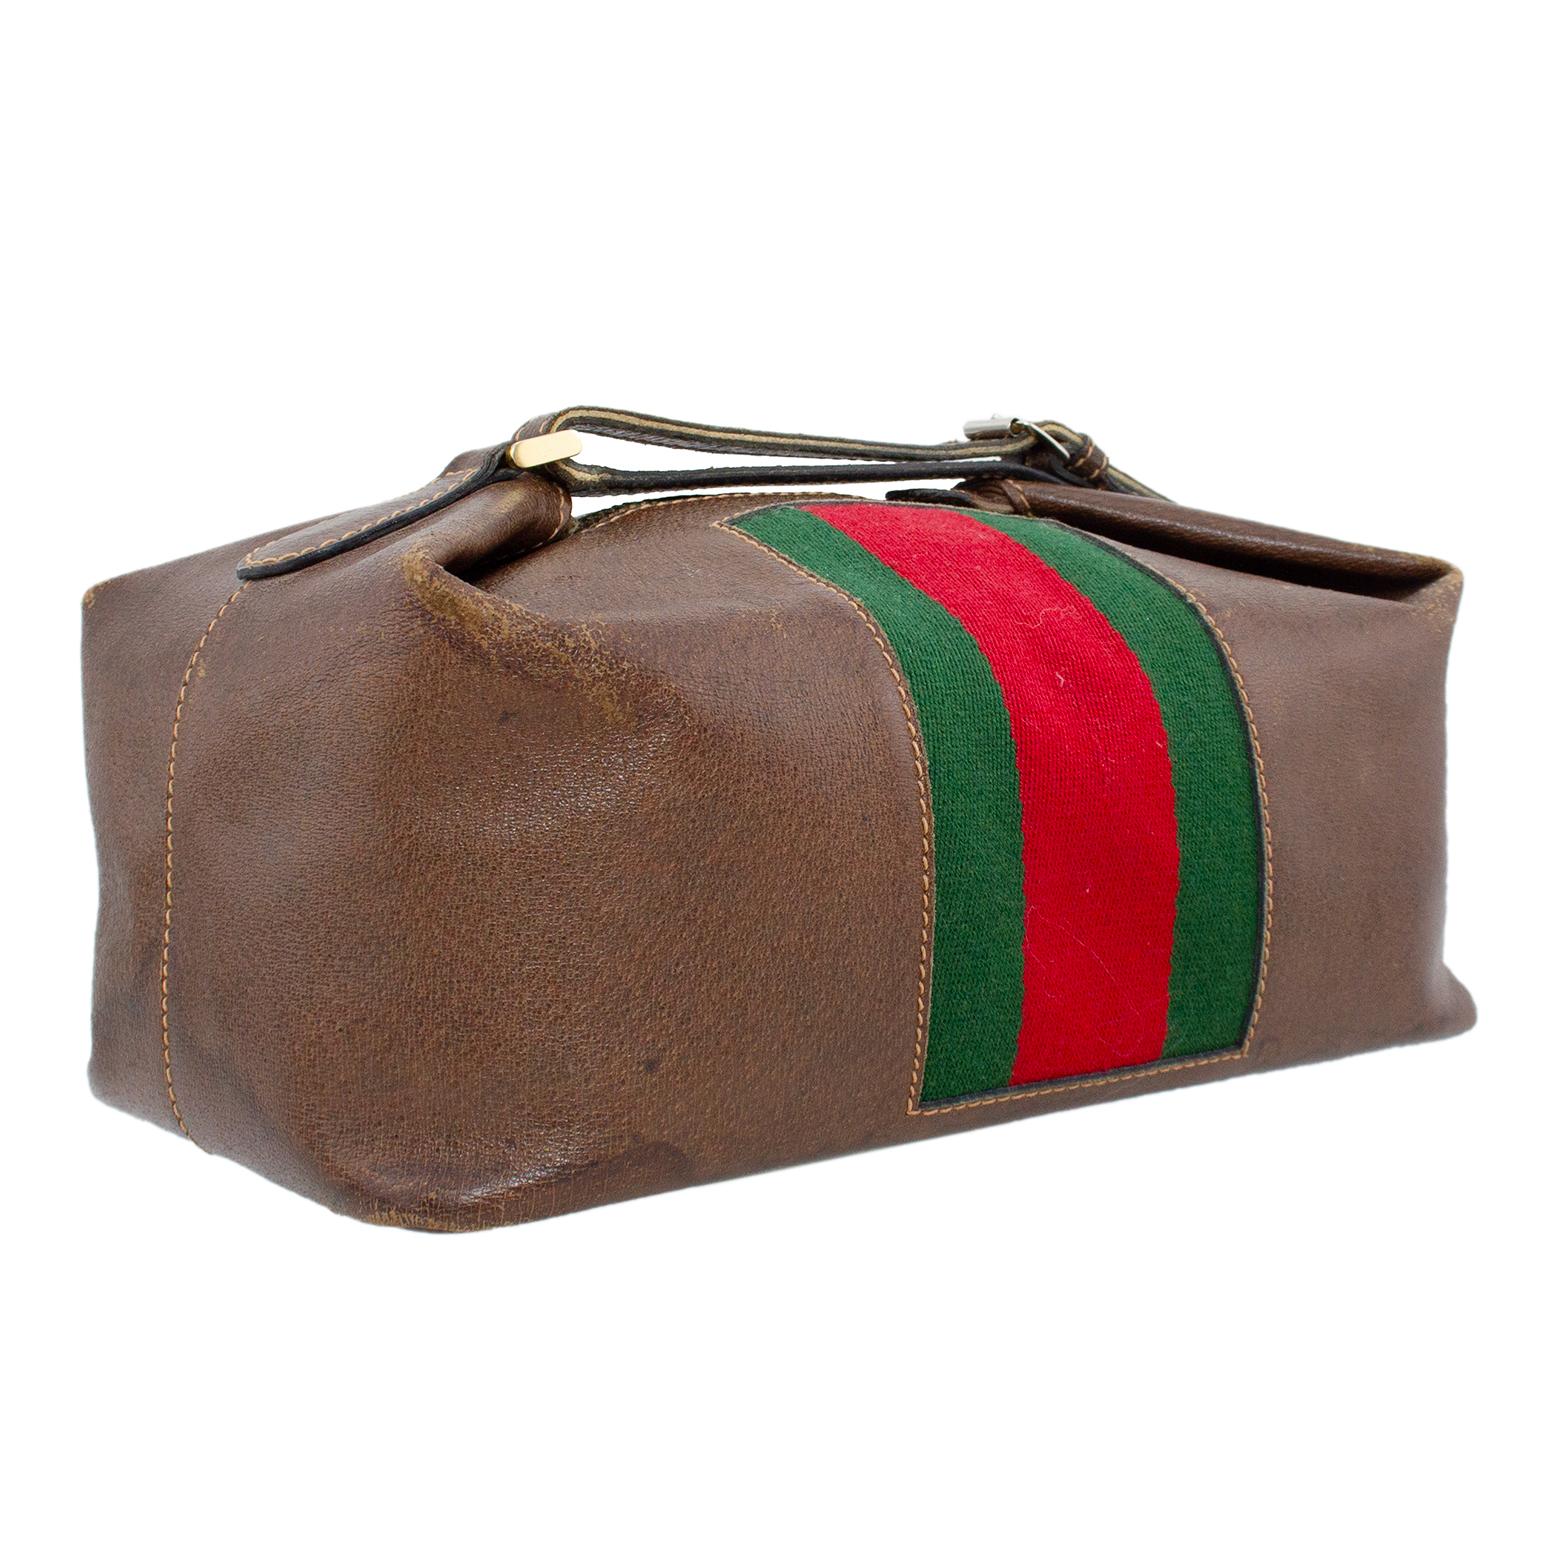 Gucci cosmetic bag from the 1970s. Pebbled dark brown leather with tan top stitching and a thick centre green and red canvas webbing centre vertical stripe. Gold top metal zipper with a handle that loops and fastens with a buckle. Worn condition